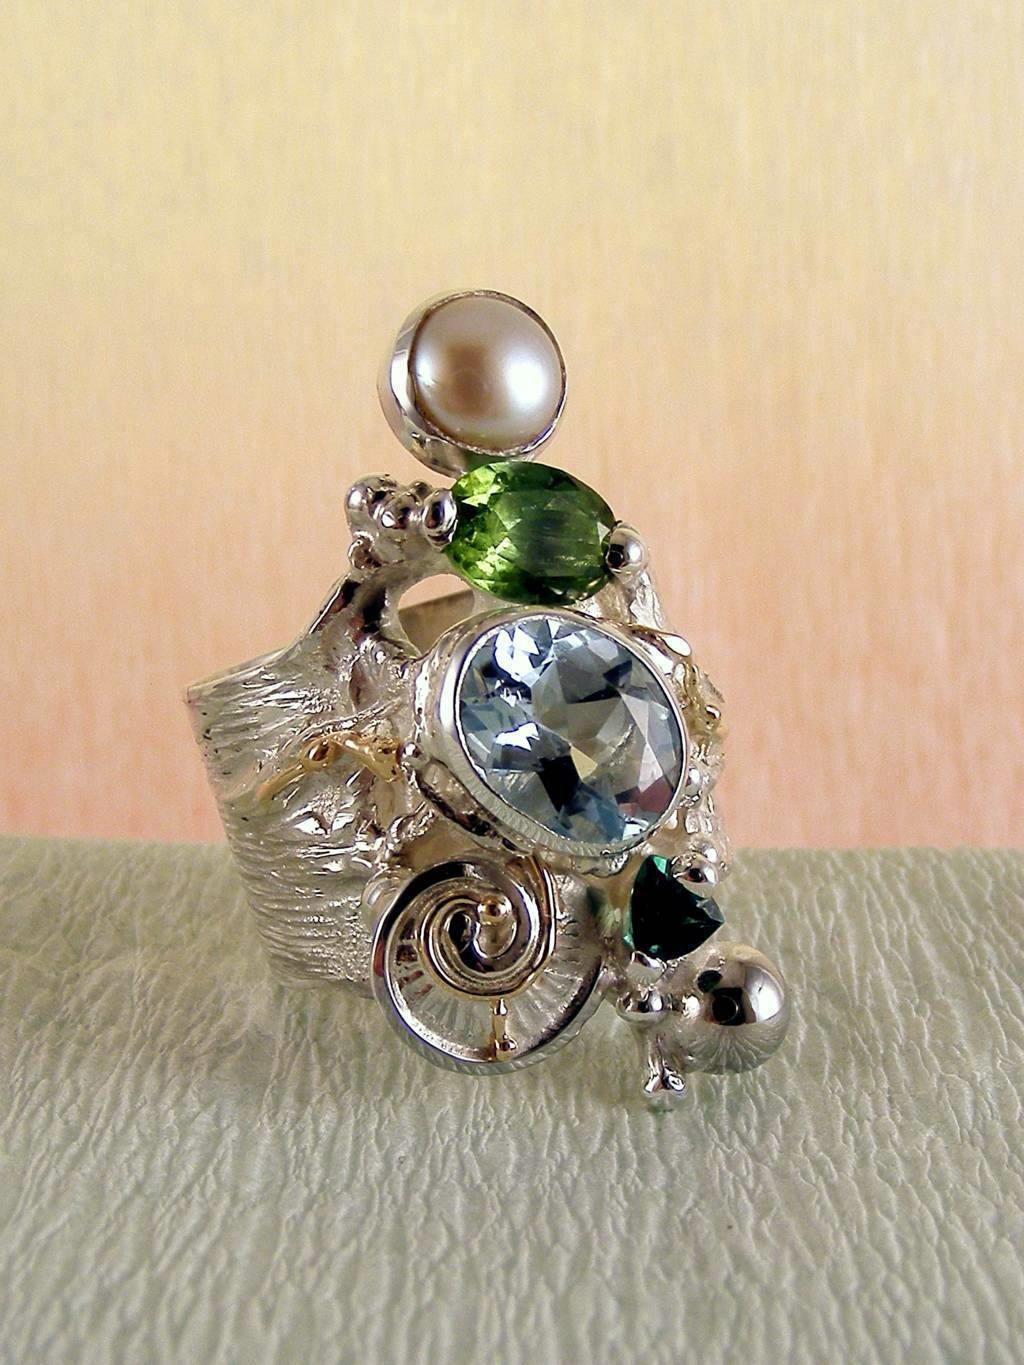 gegory pyra piro ring 1441, mixed metal jewellery from silver and gold, rings for women with blue topaz and peridot, rings for women with green tourmaline and pearl, rings for women with blue topaz and pearls, rings for women with blue topaz and green tourmaline, rings in art and craft galleries